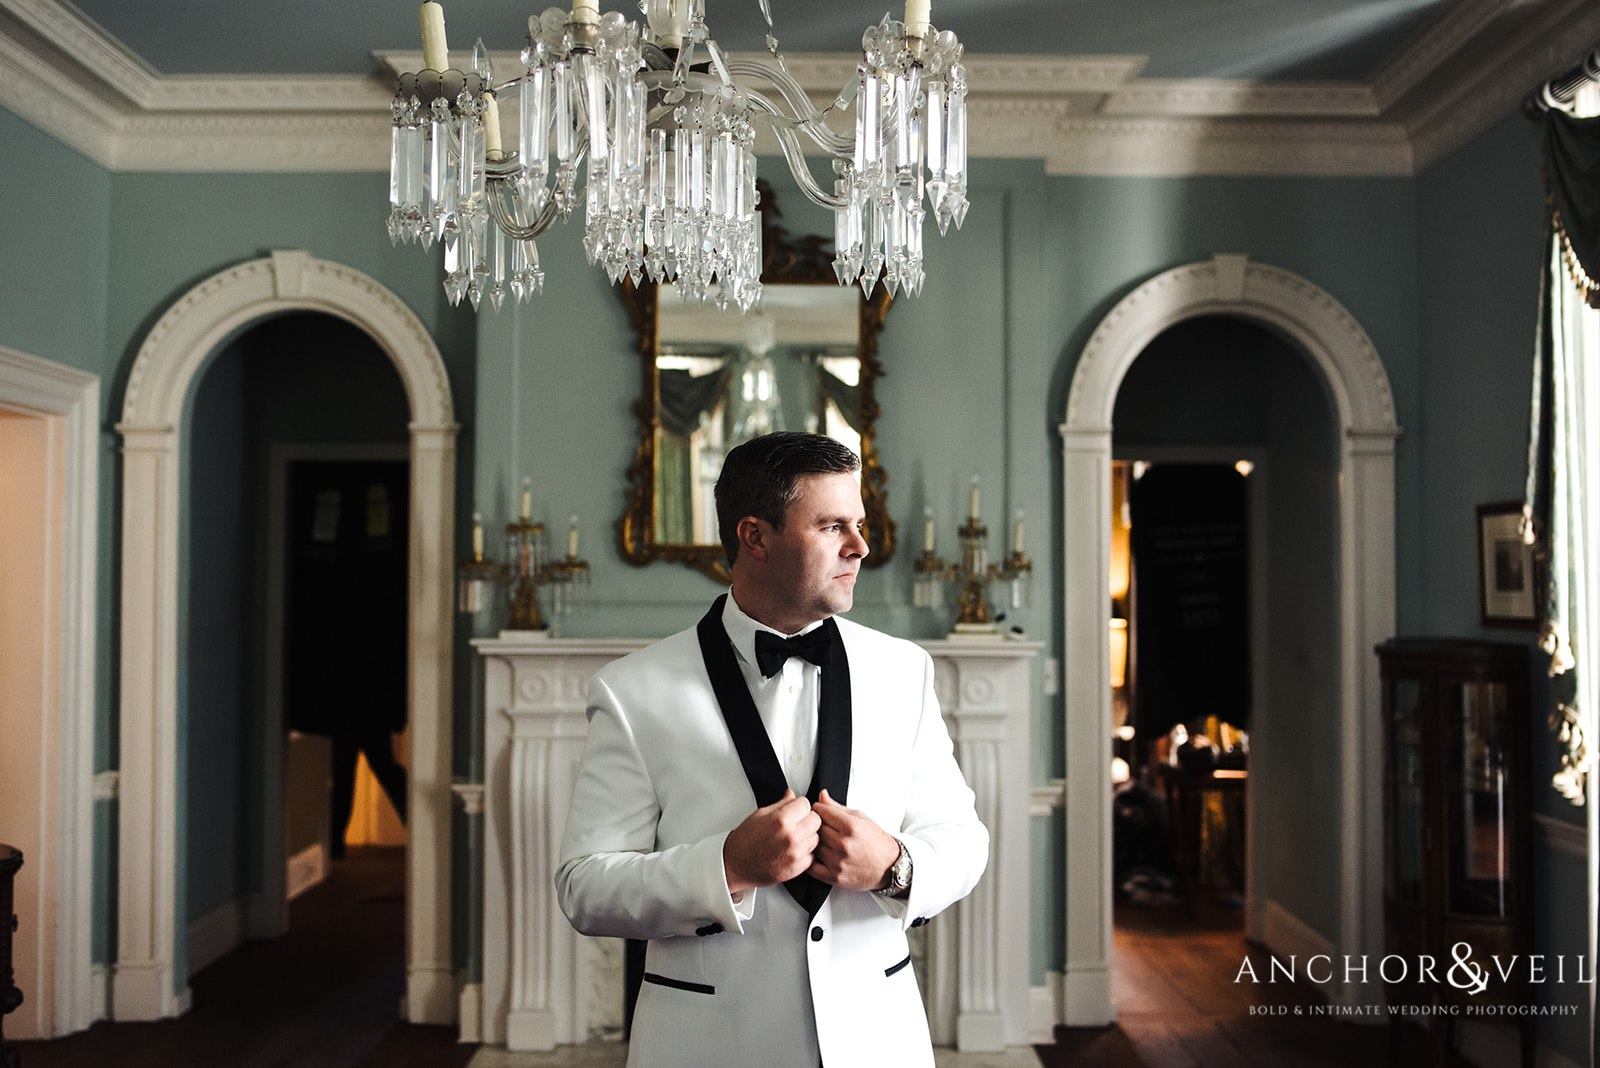 The groom in his dinner jacket for the reception at the Lowndes Grove Plantation Wedding